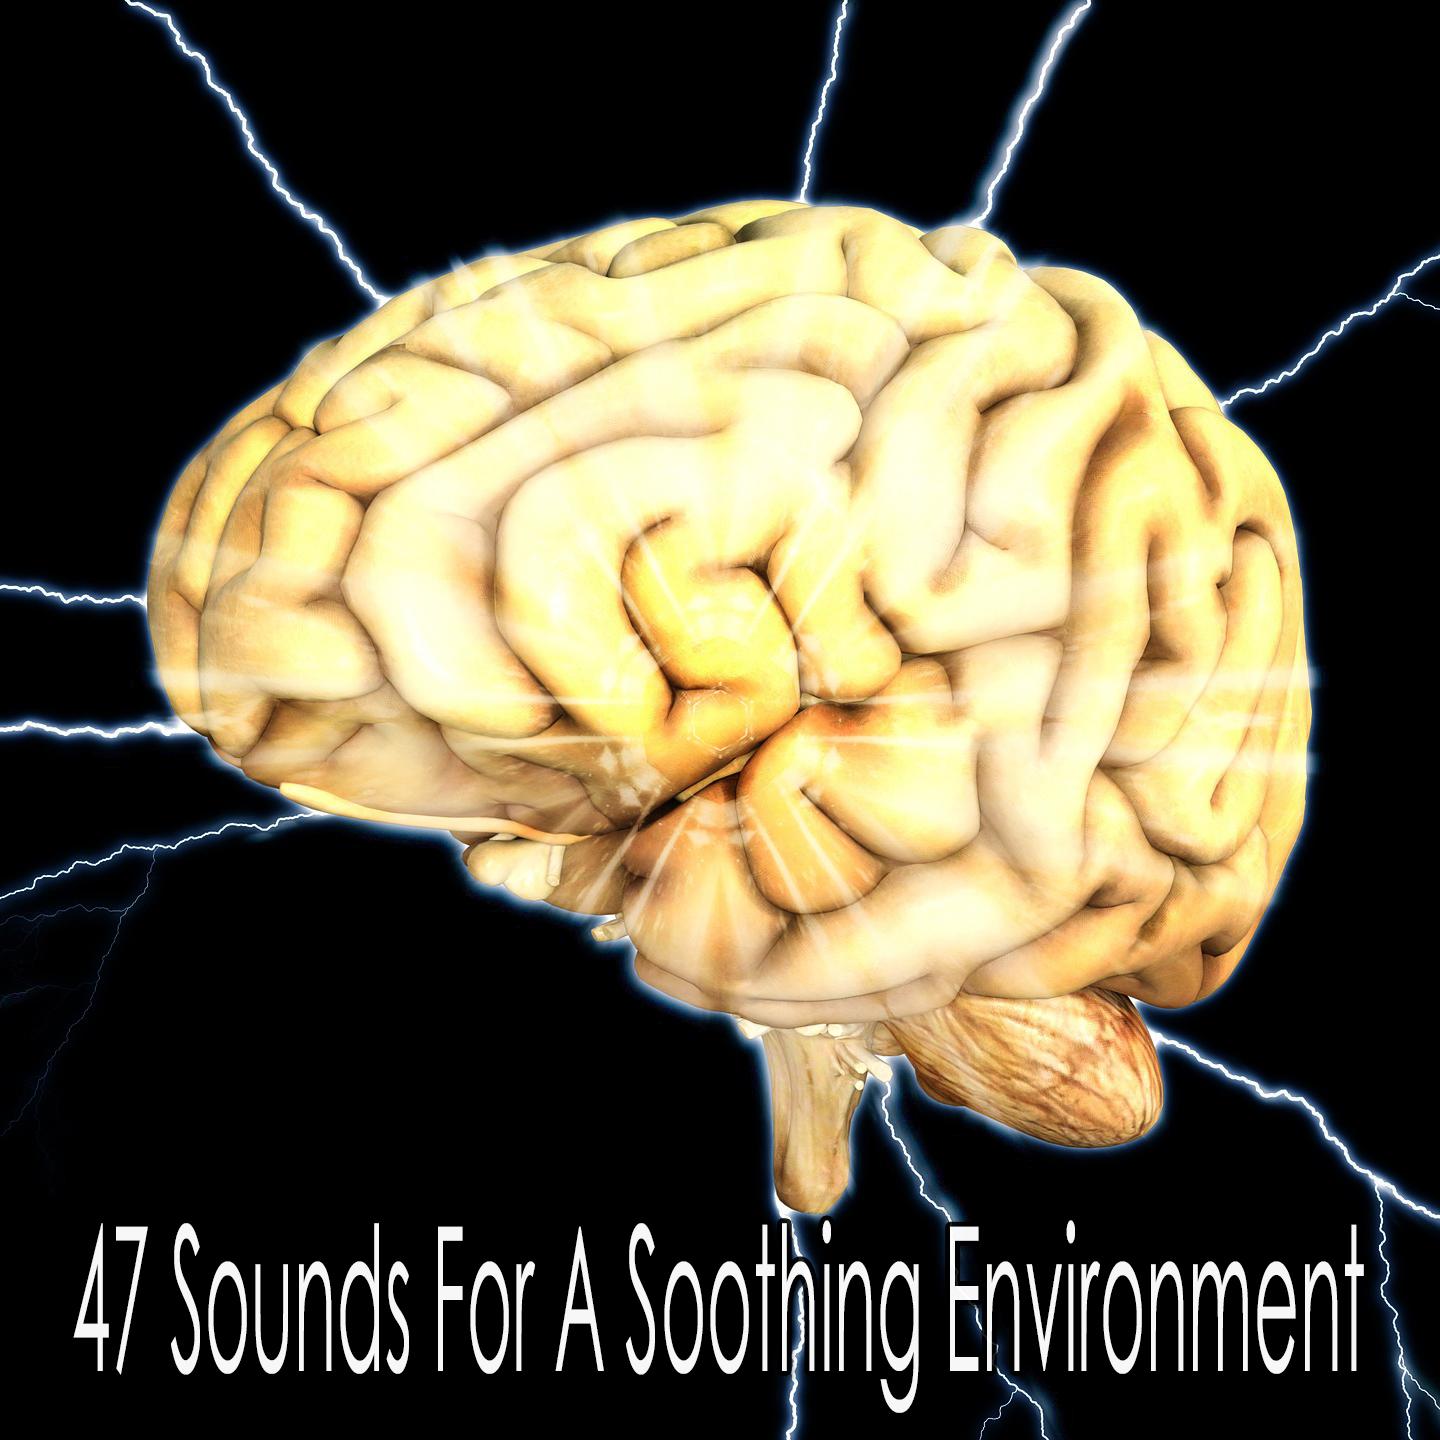 47 Sounds For A Soothing Environment